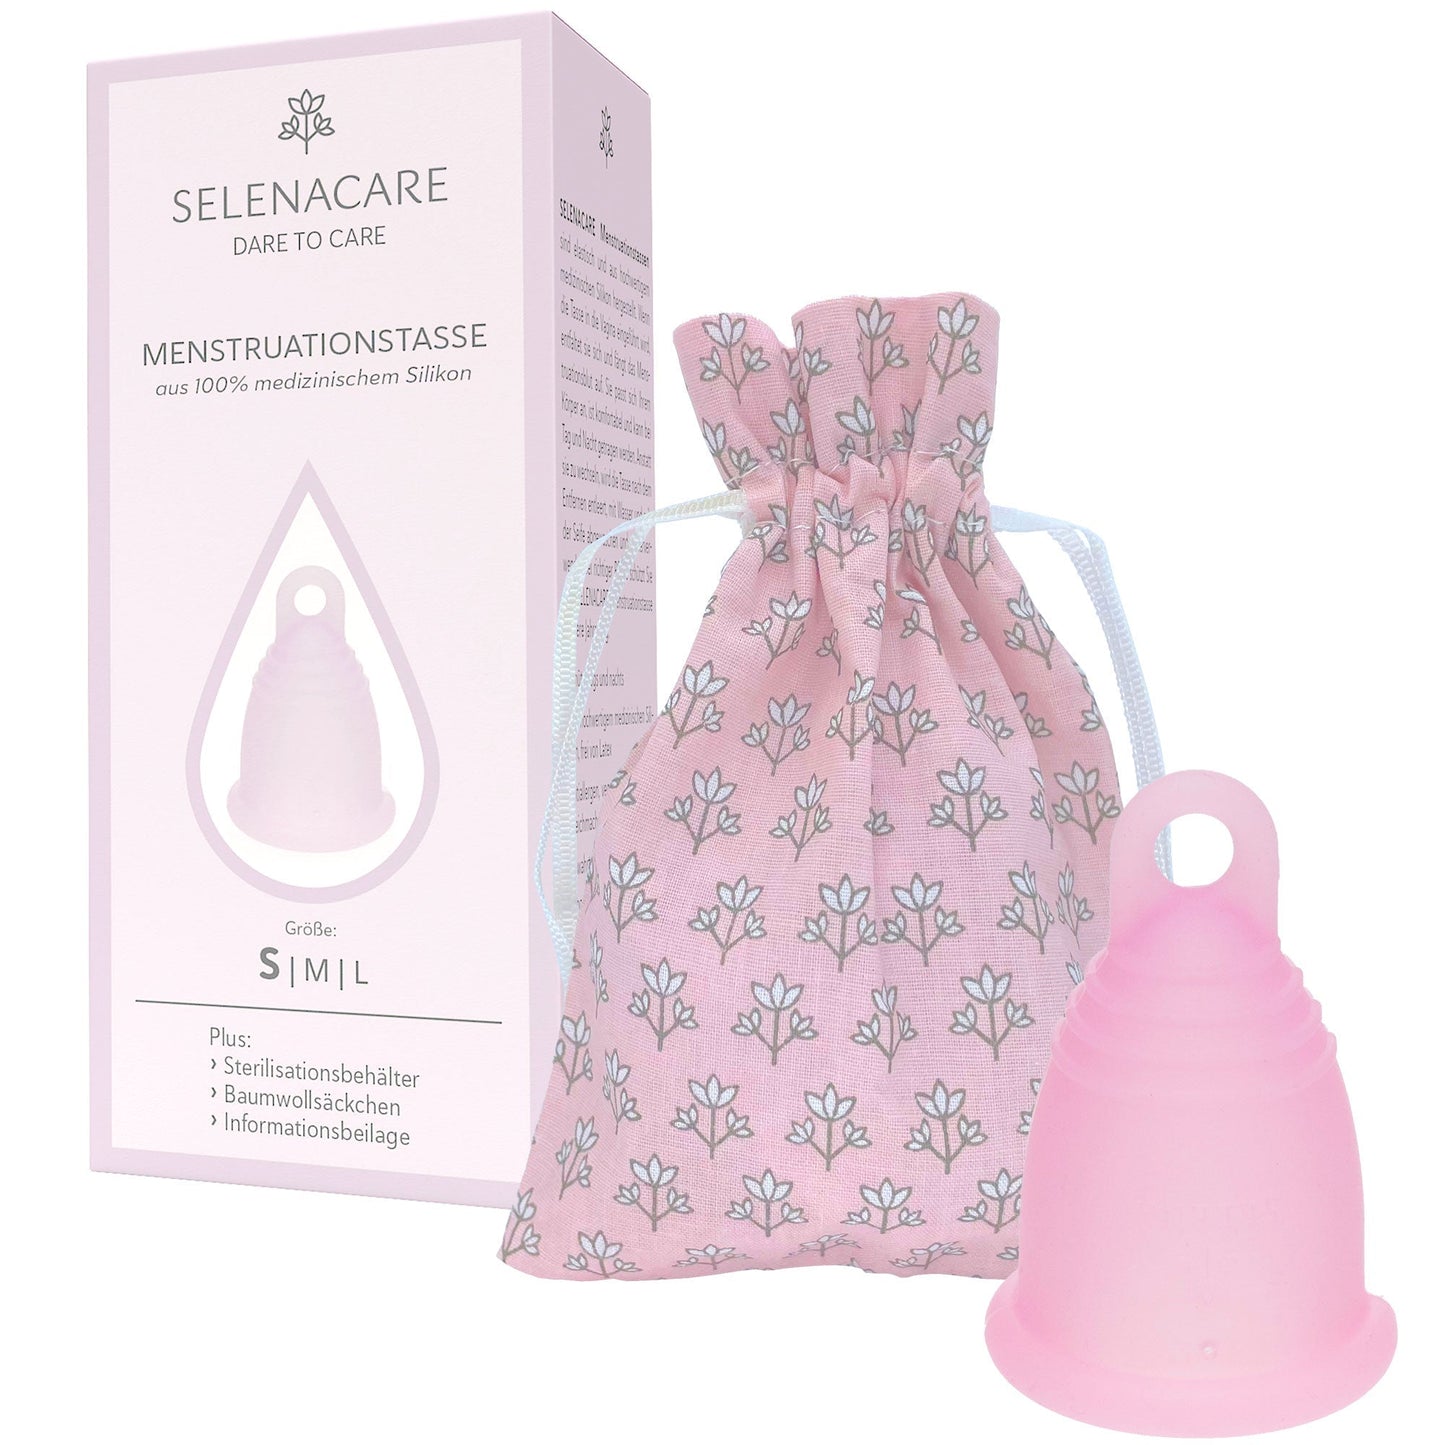 Menstrual Cup made of medical silicone and without BPA - SELENACARE